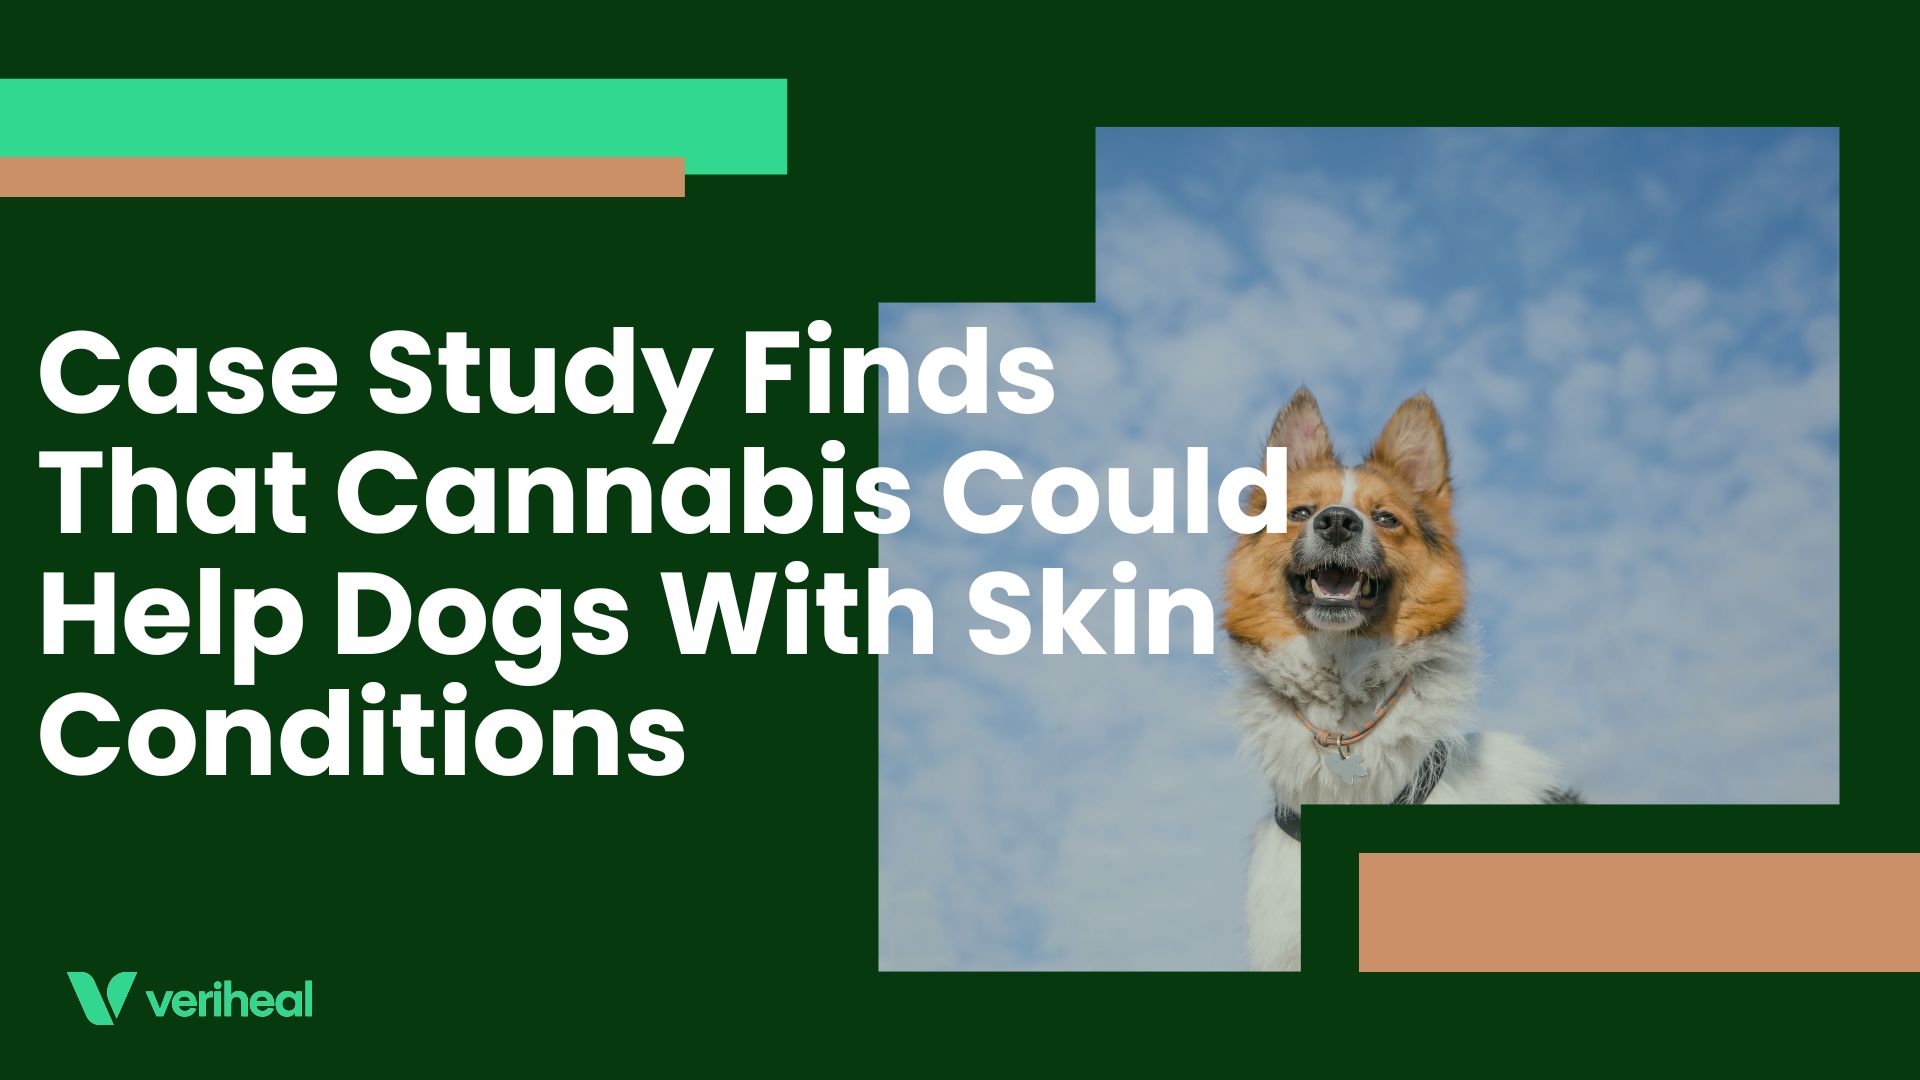 Case Study Finds That Cannabis Could Help Dogs With Skin Conditions